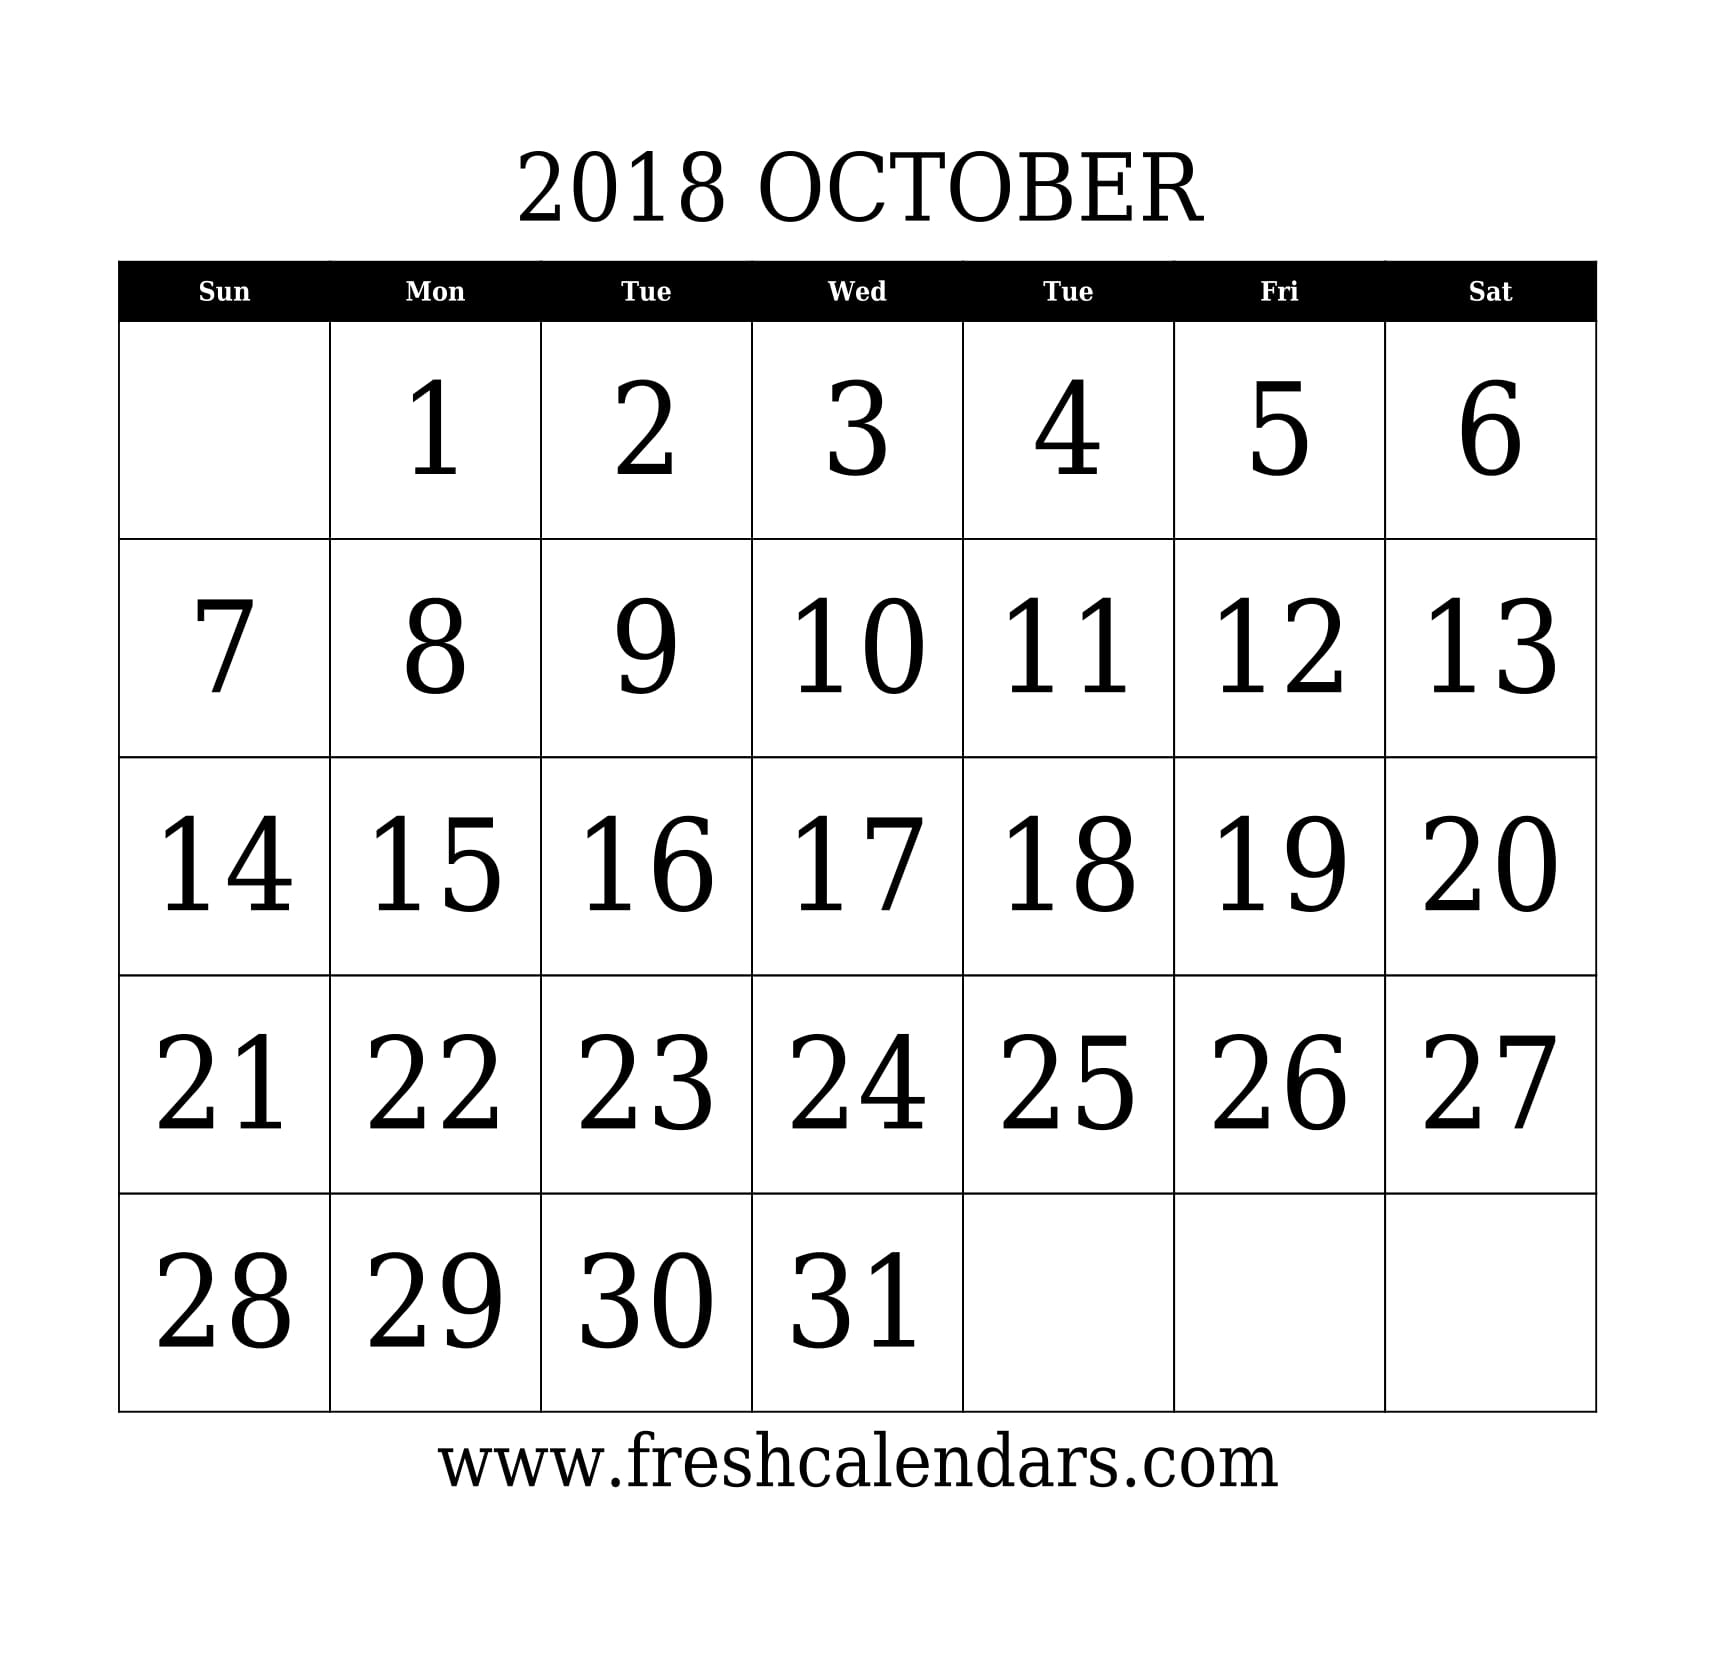 October 2018 Calendar With Large Dates